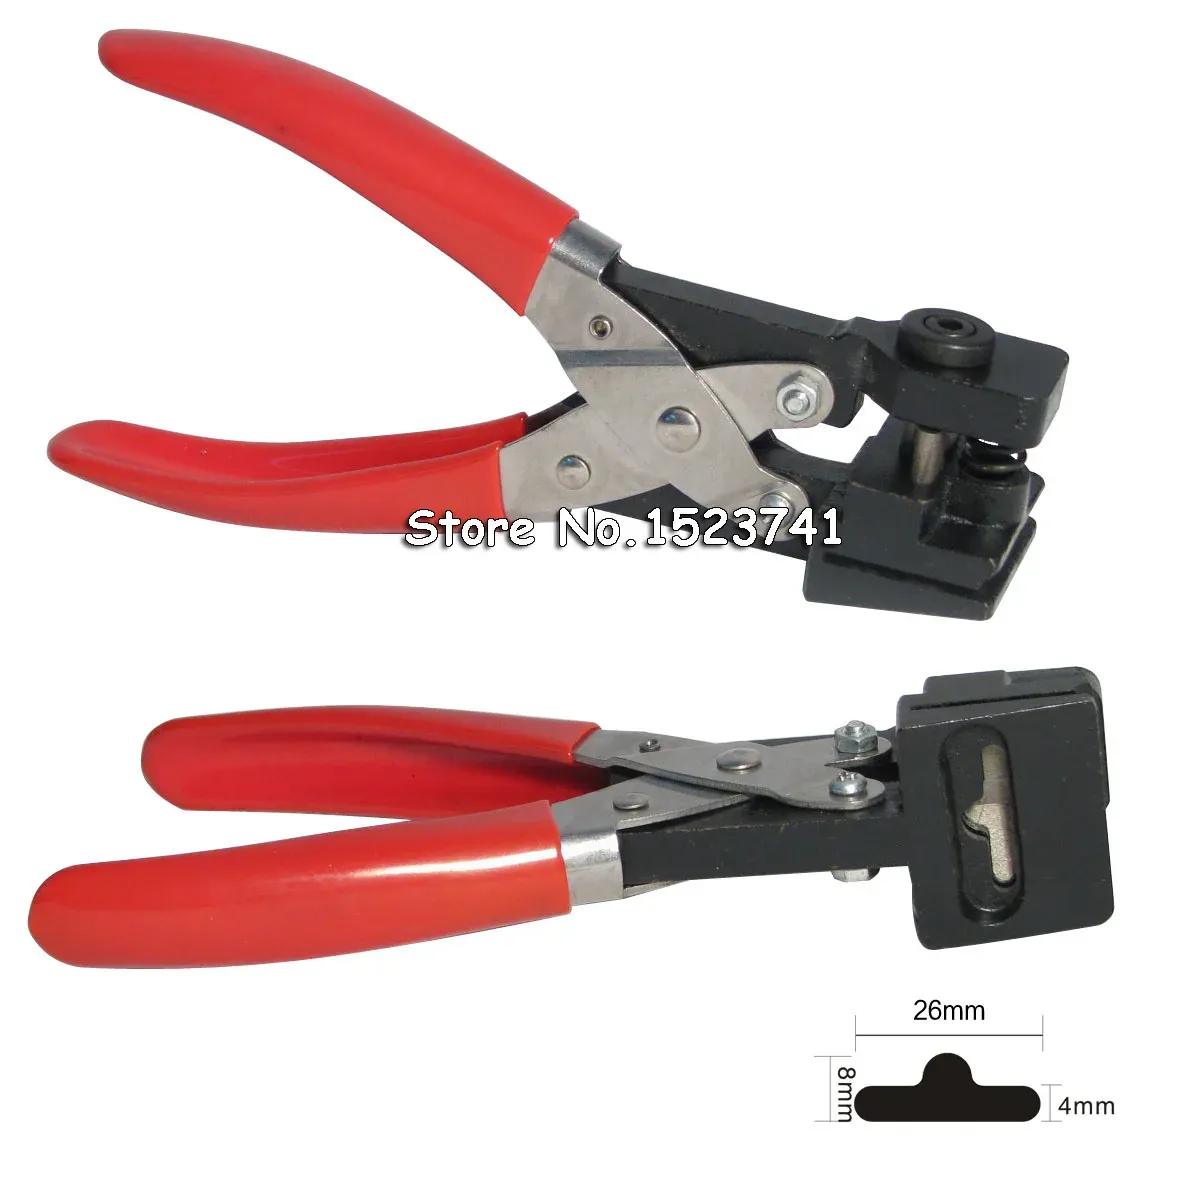 Punch T Shape Hole Puncher Slot Cutter Puncher Plier Cardboard PVC Card Punch Pliers DIY Punch Tool Stationery Supplies